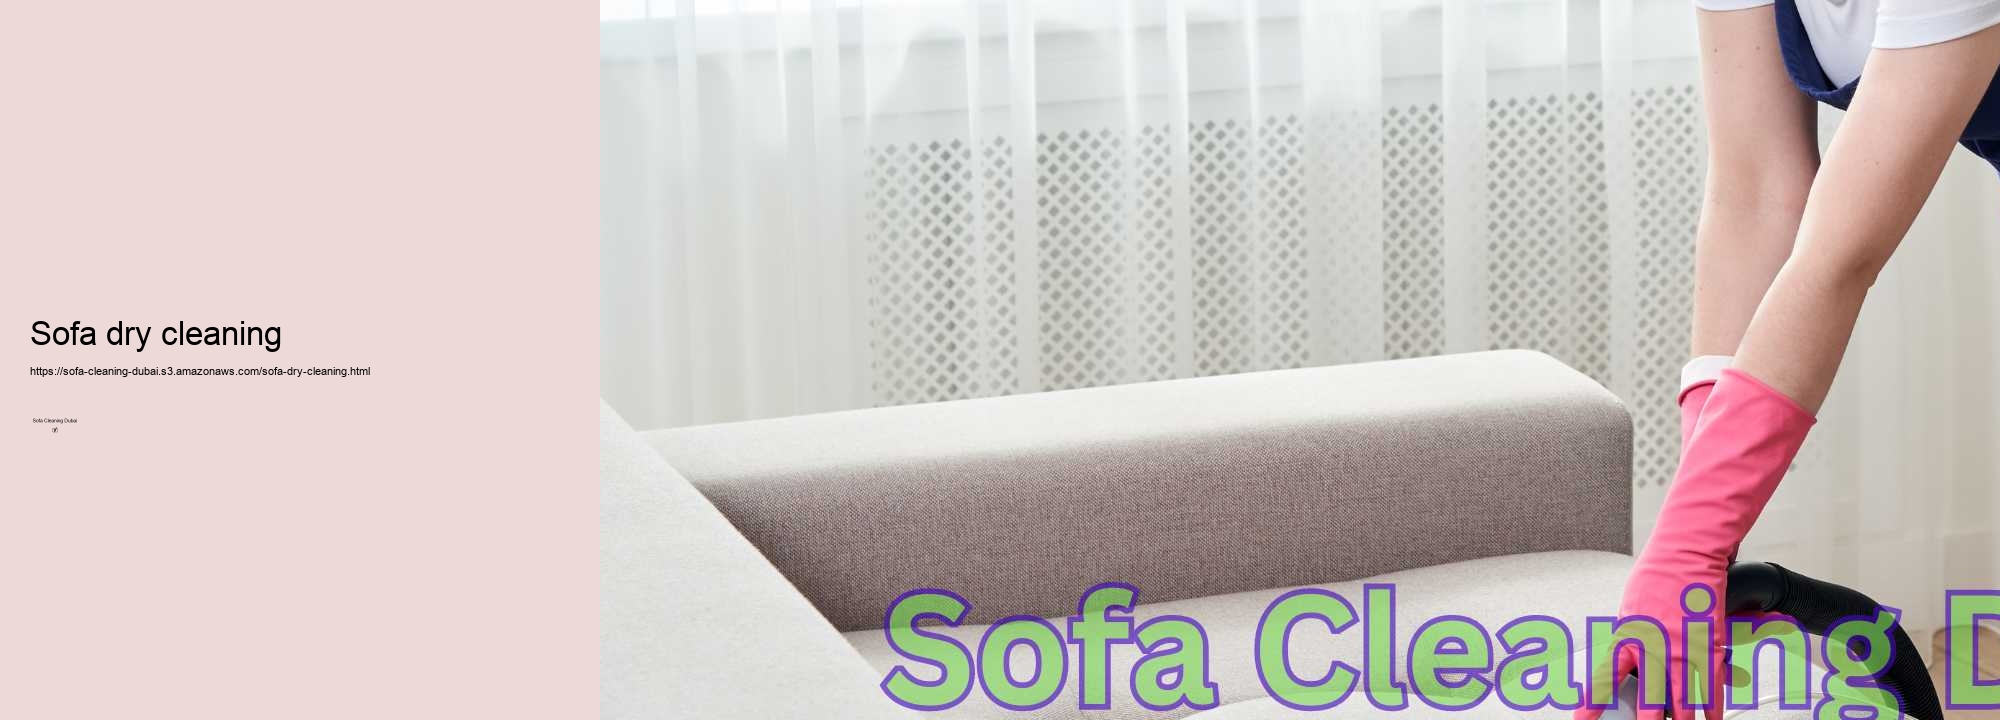 Sofa dry cleaning